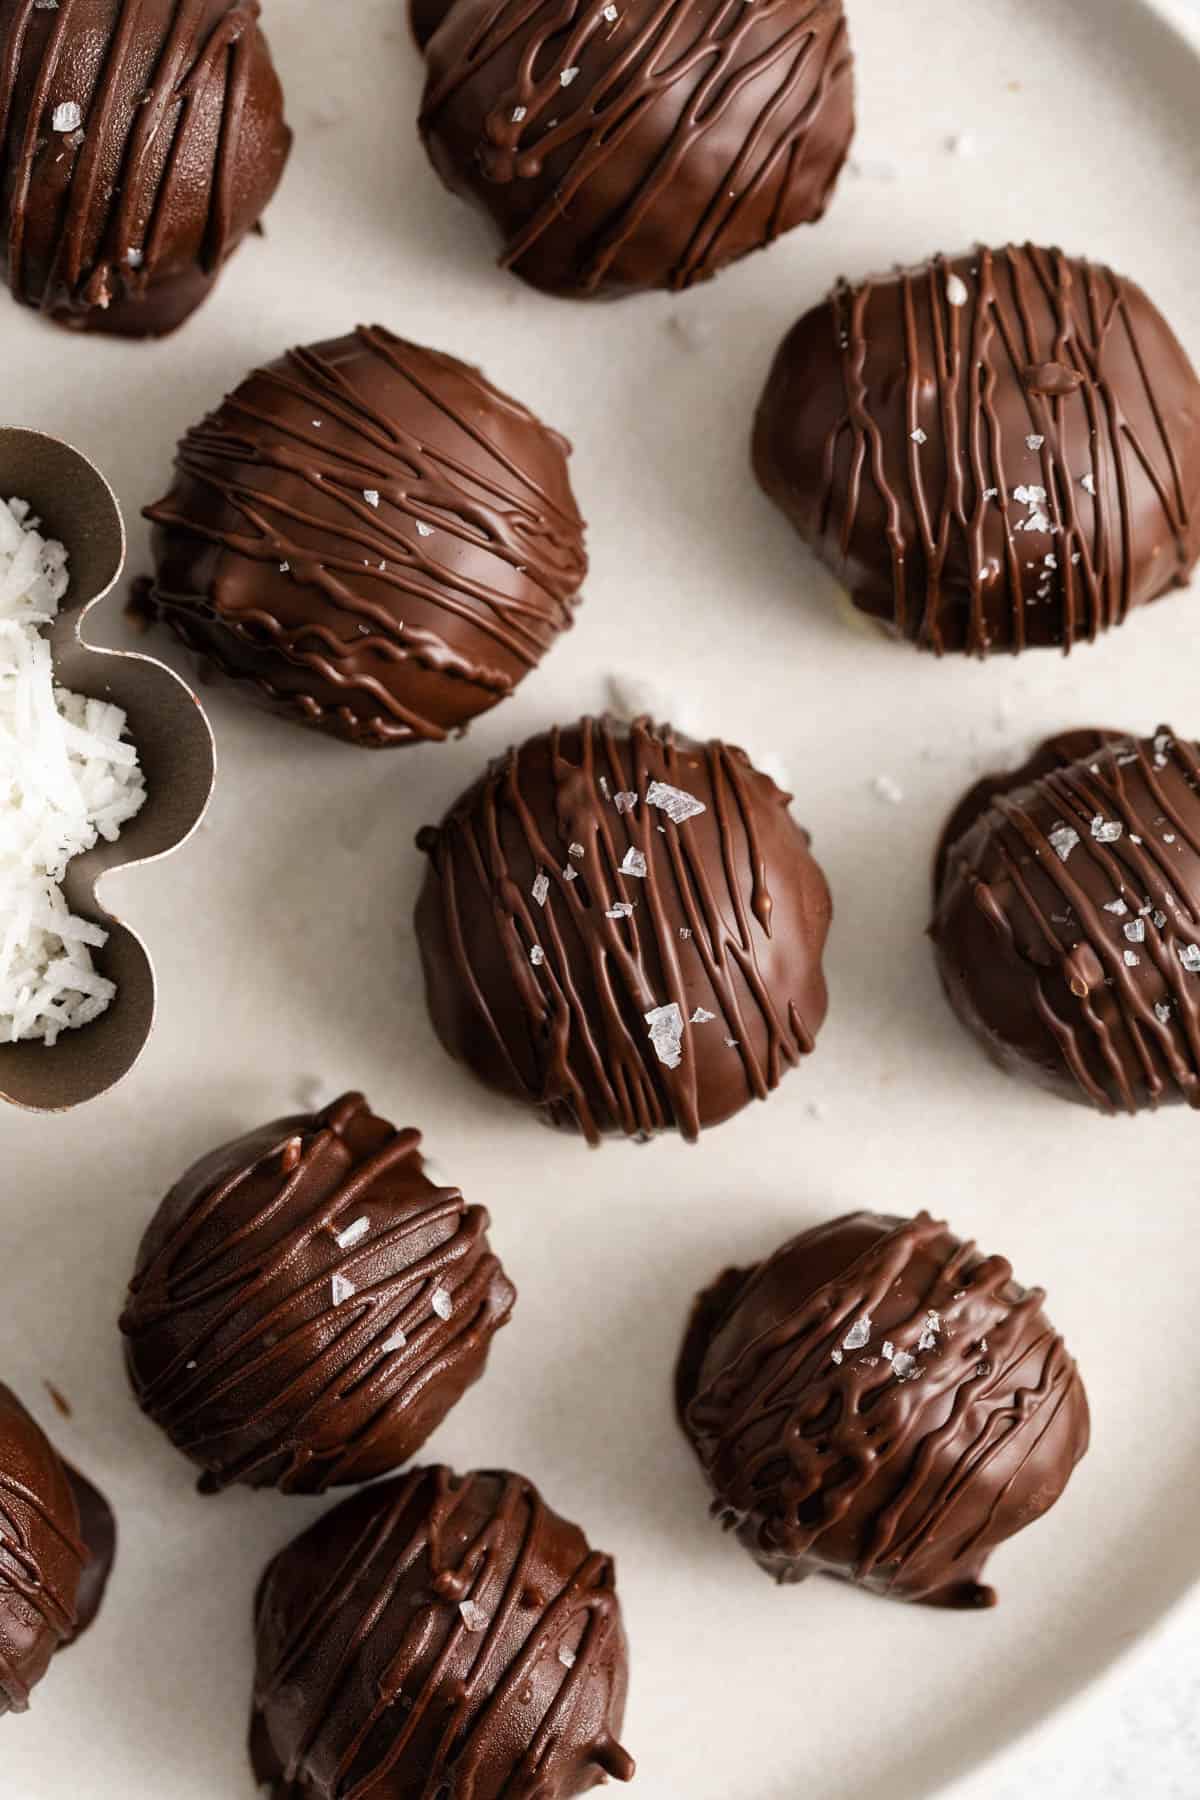 A close image of chocolate covered coconut balls.